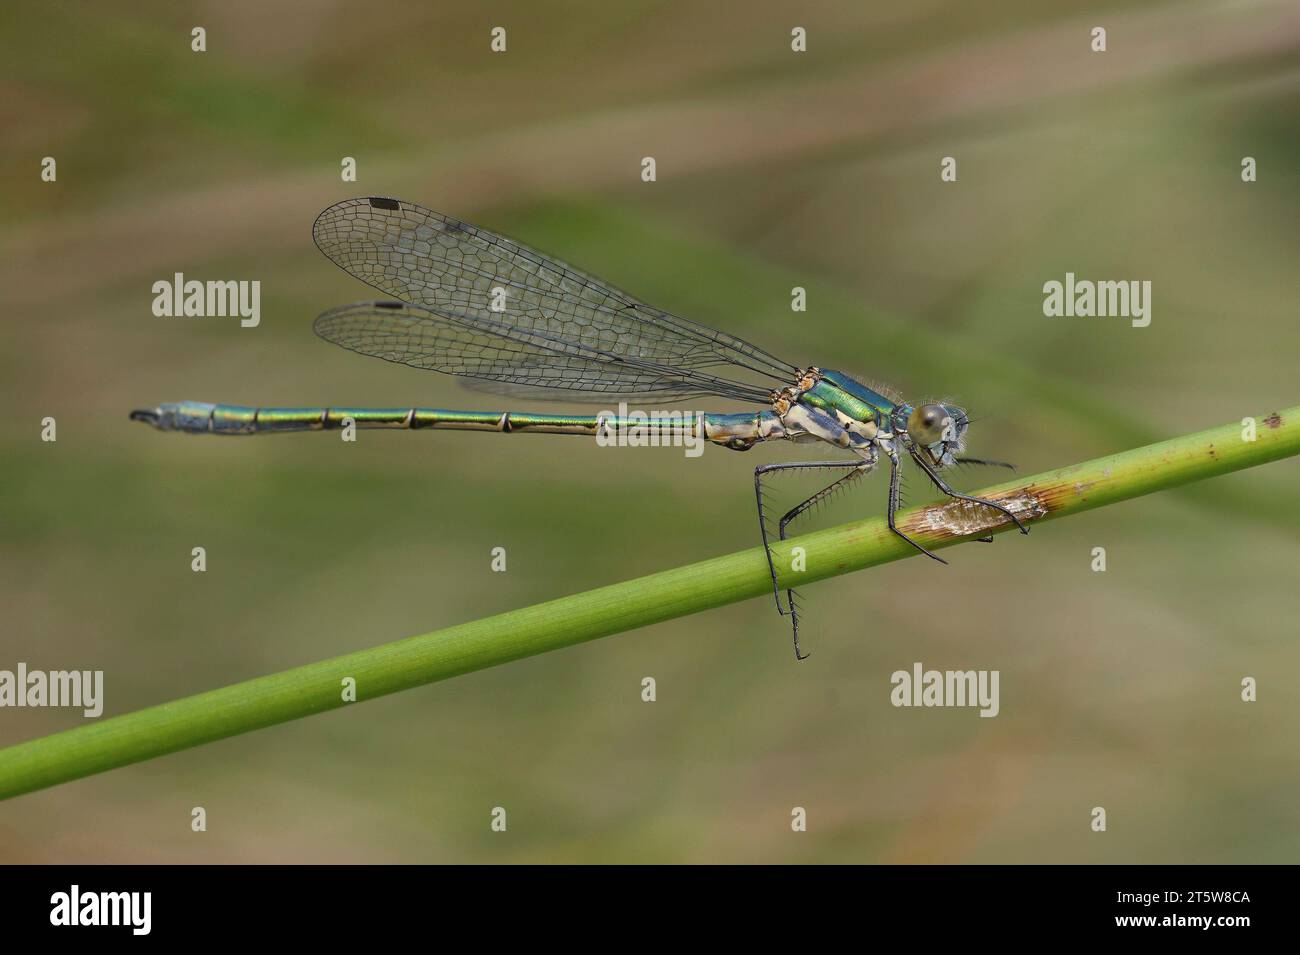 Natural closeup on a male Emerald Spreadwing, Lestes dryas, damselfly, against a green background Stock Photo